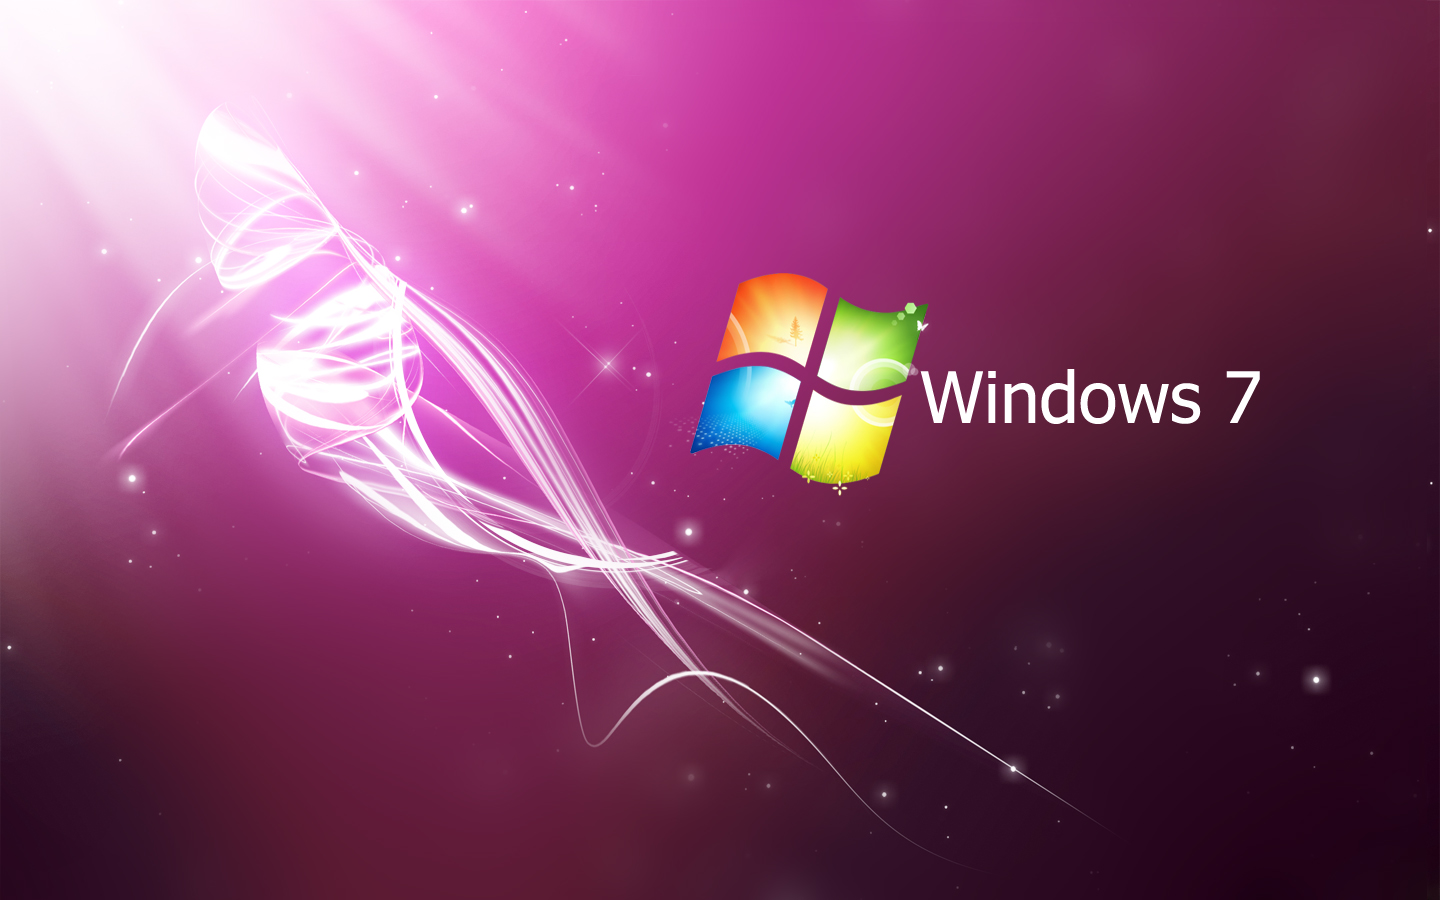 TipTop 3D  HD  Wallpapers  Collection Windows  7 Wallpapers 